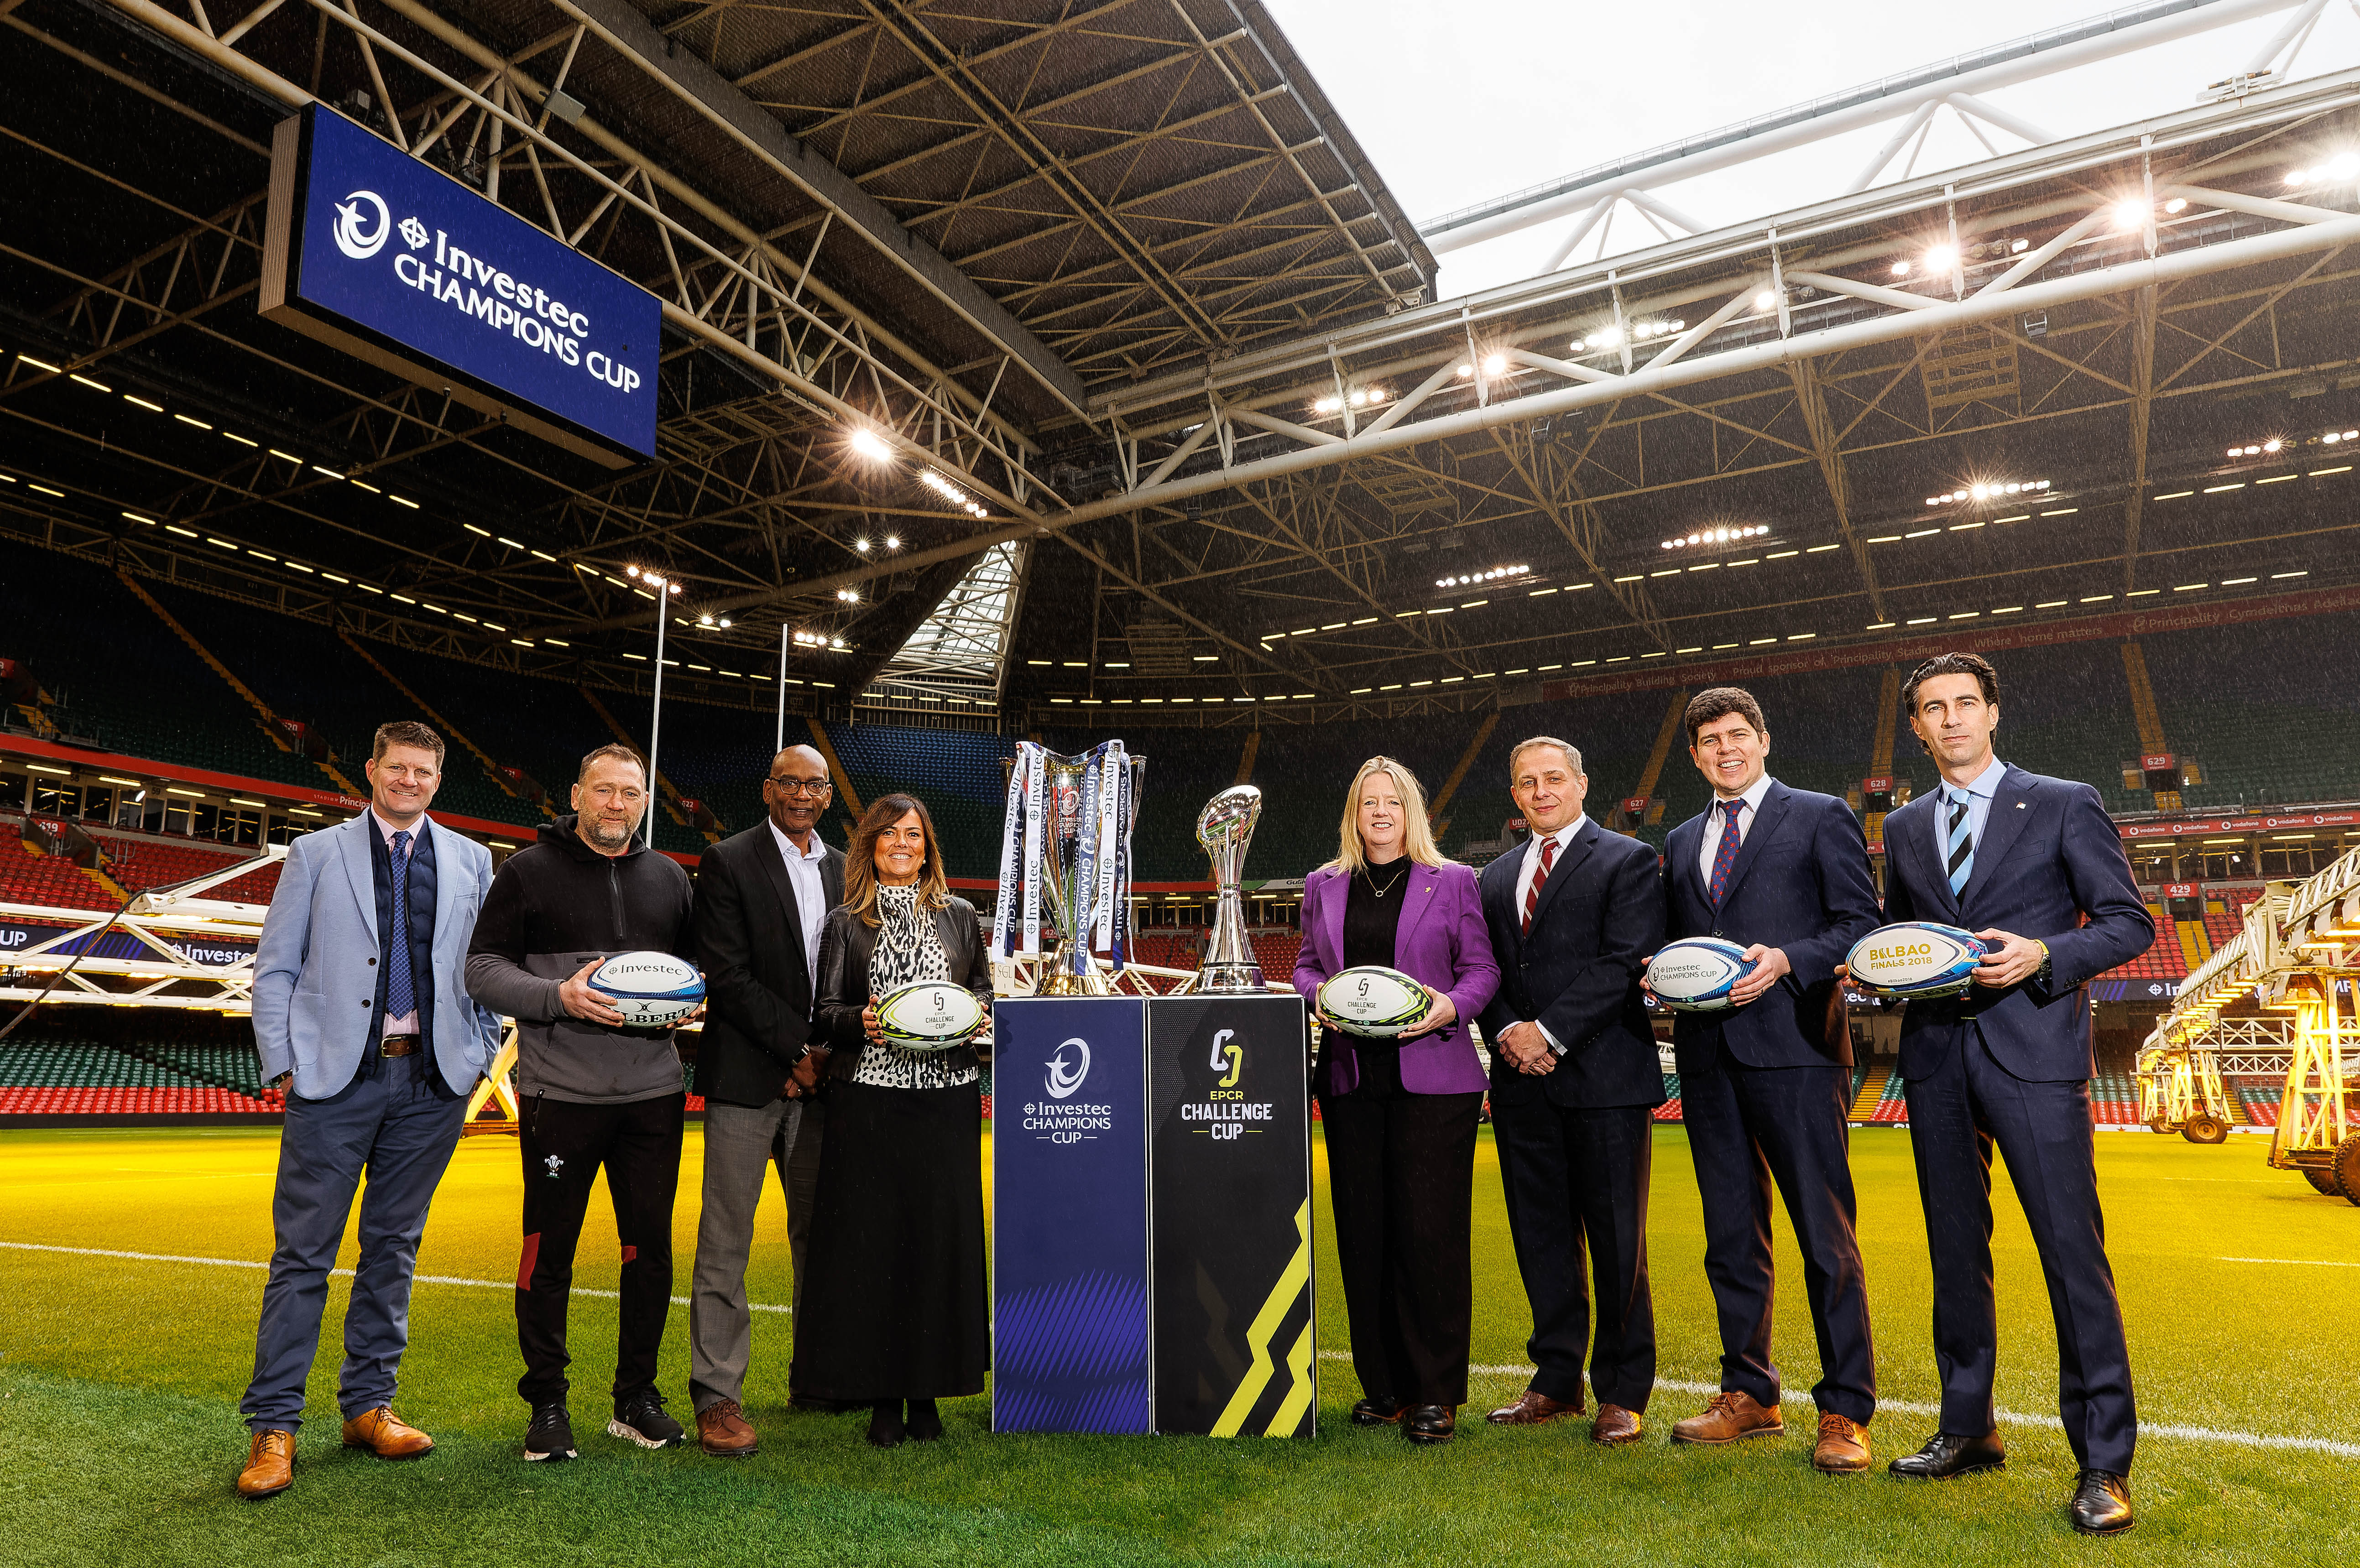 Cardiff to host EPCR Finals in 2025